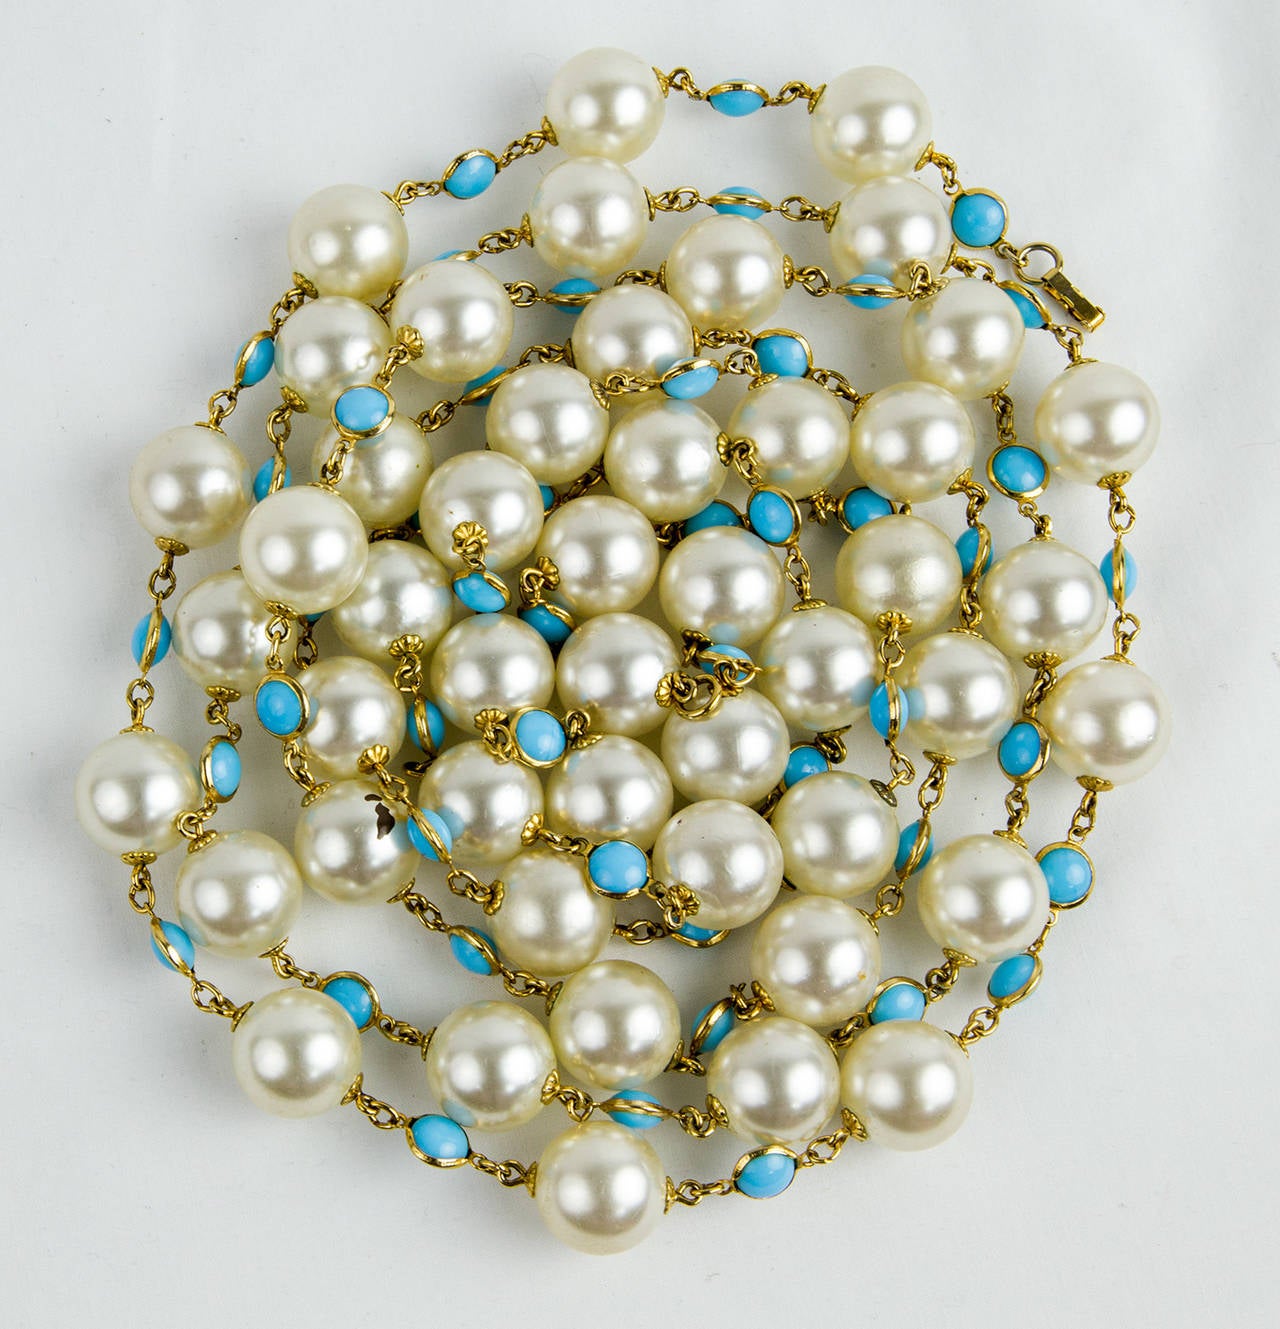 Versatile long Statement Necklace of large (18mm) faux Pearls inter-spaced with Turquoise glass stones set in bezel gold-tone setting. Can be worn as a very long single or… doubled and tripled for a shorter multifaceted look; Beautiful when worn